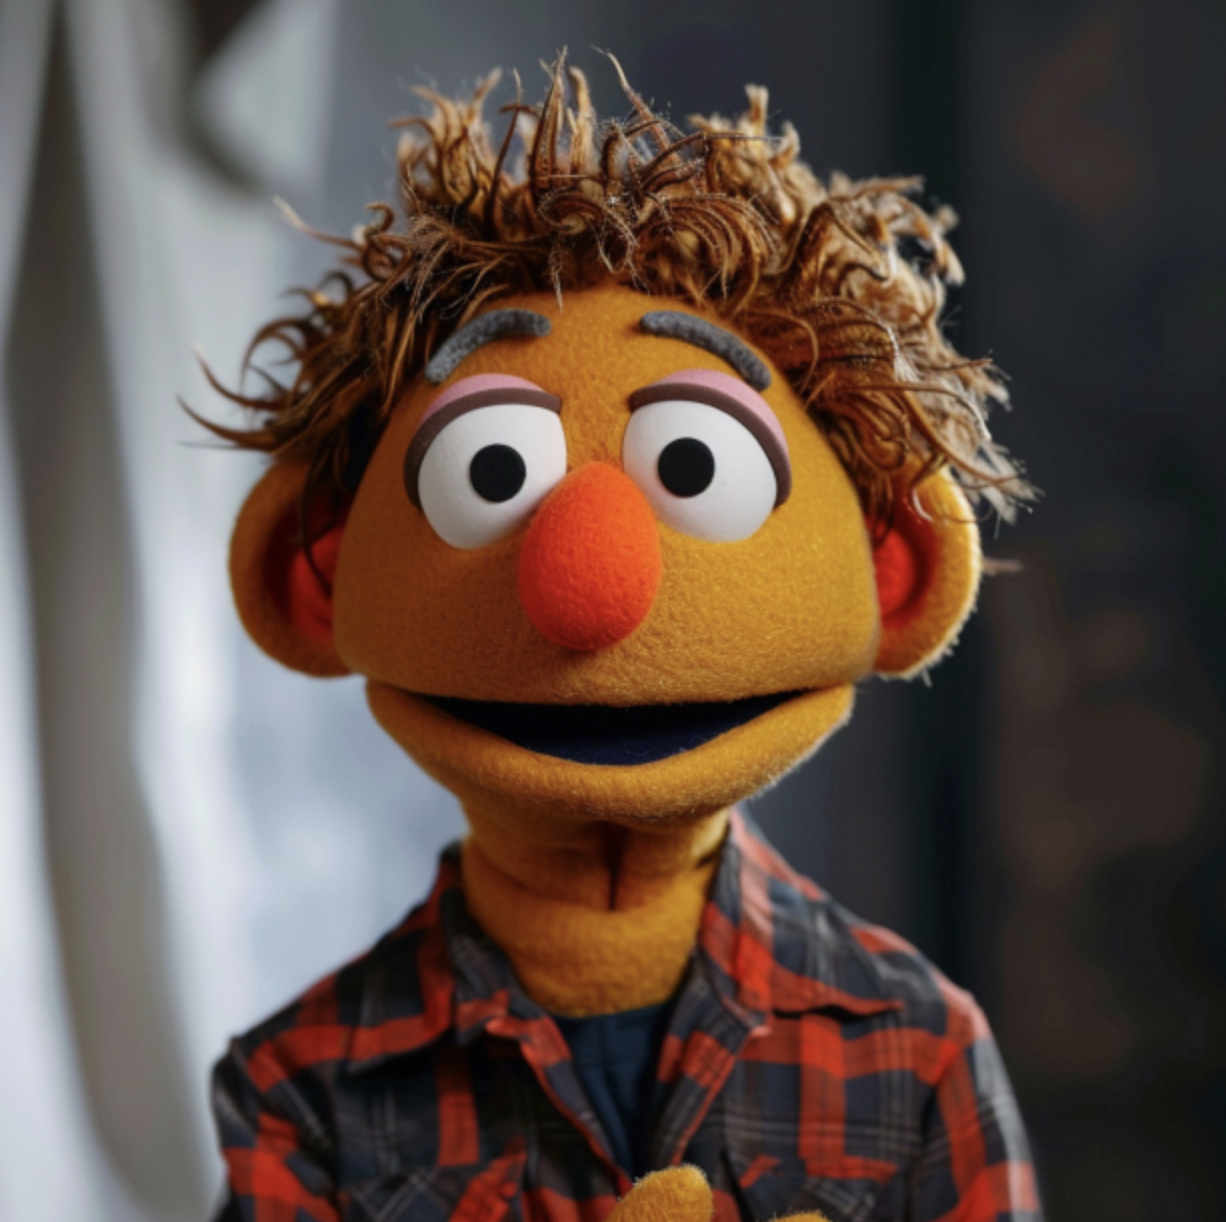 Muppet character in plaid shirt and short wavy, dirty blonde hair